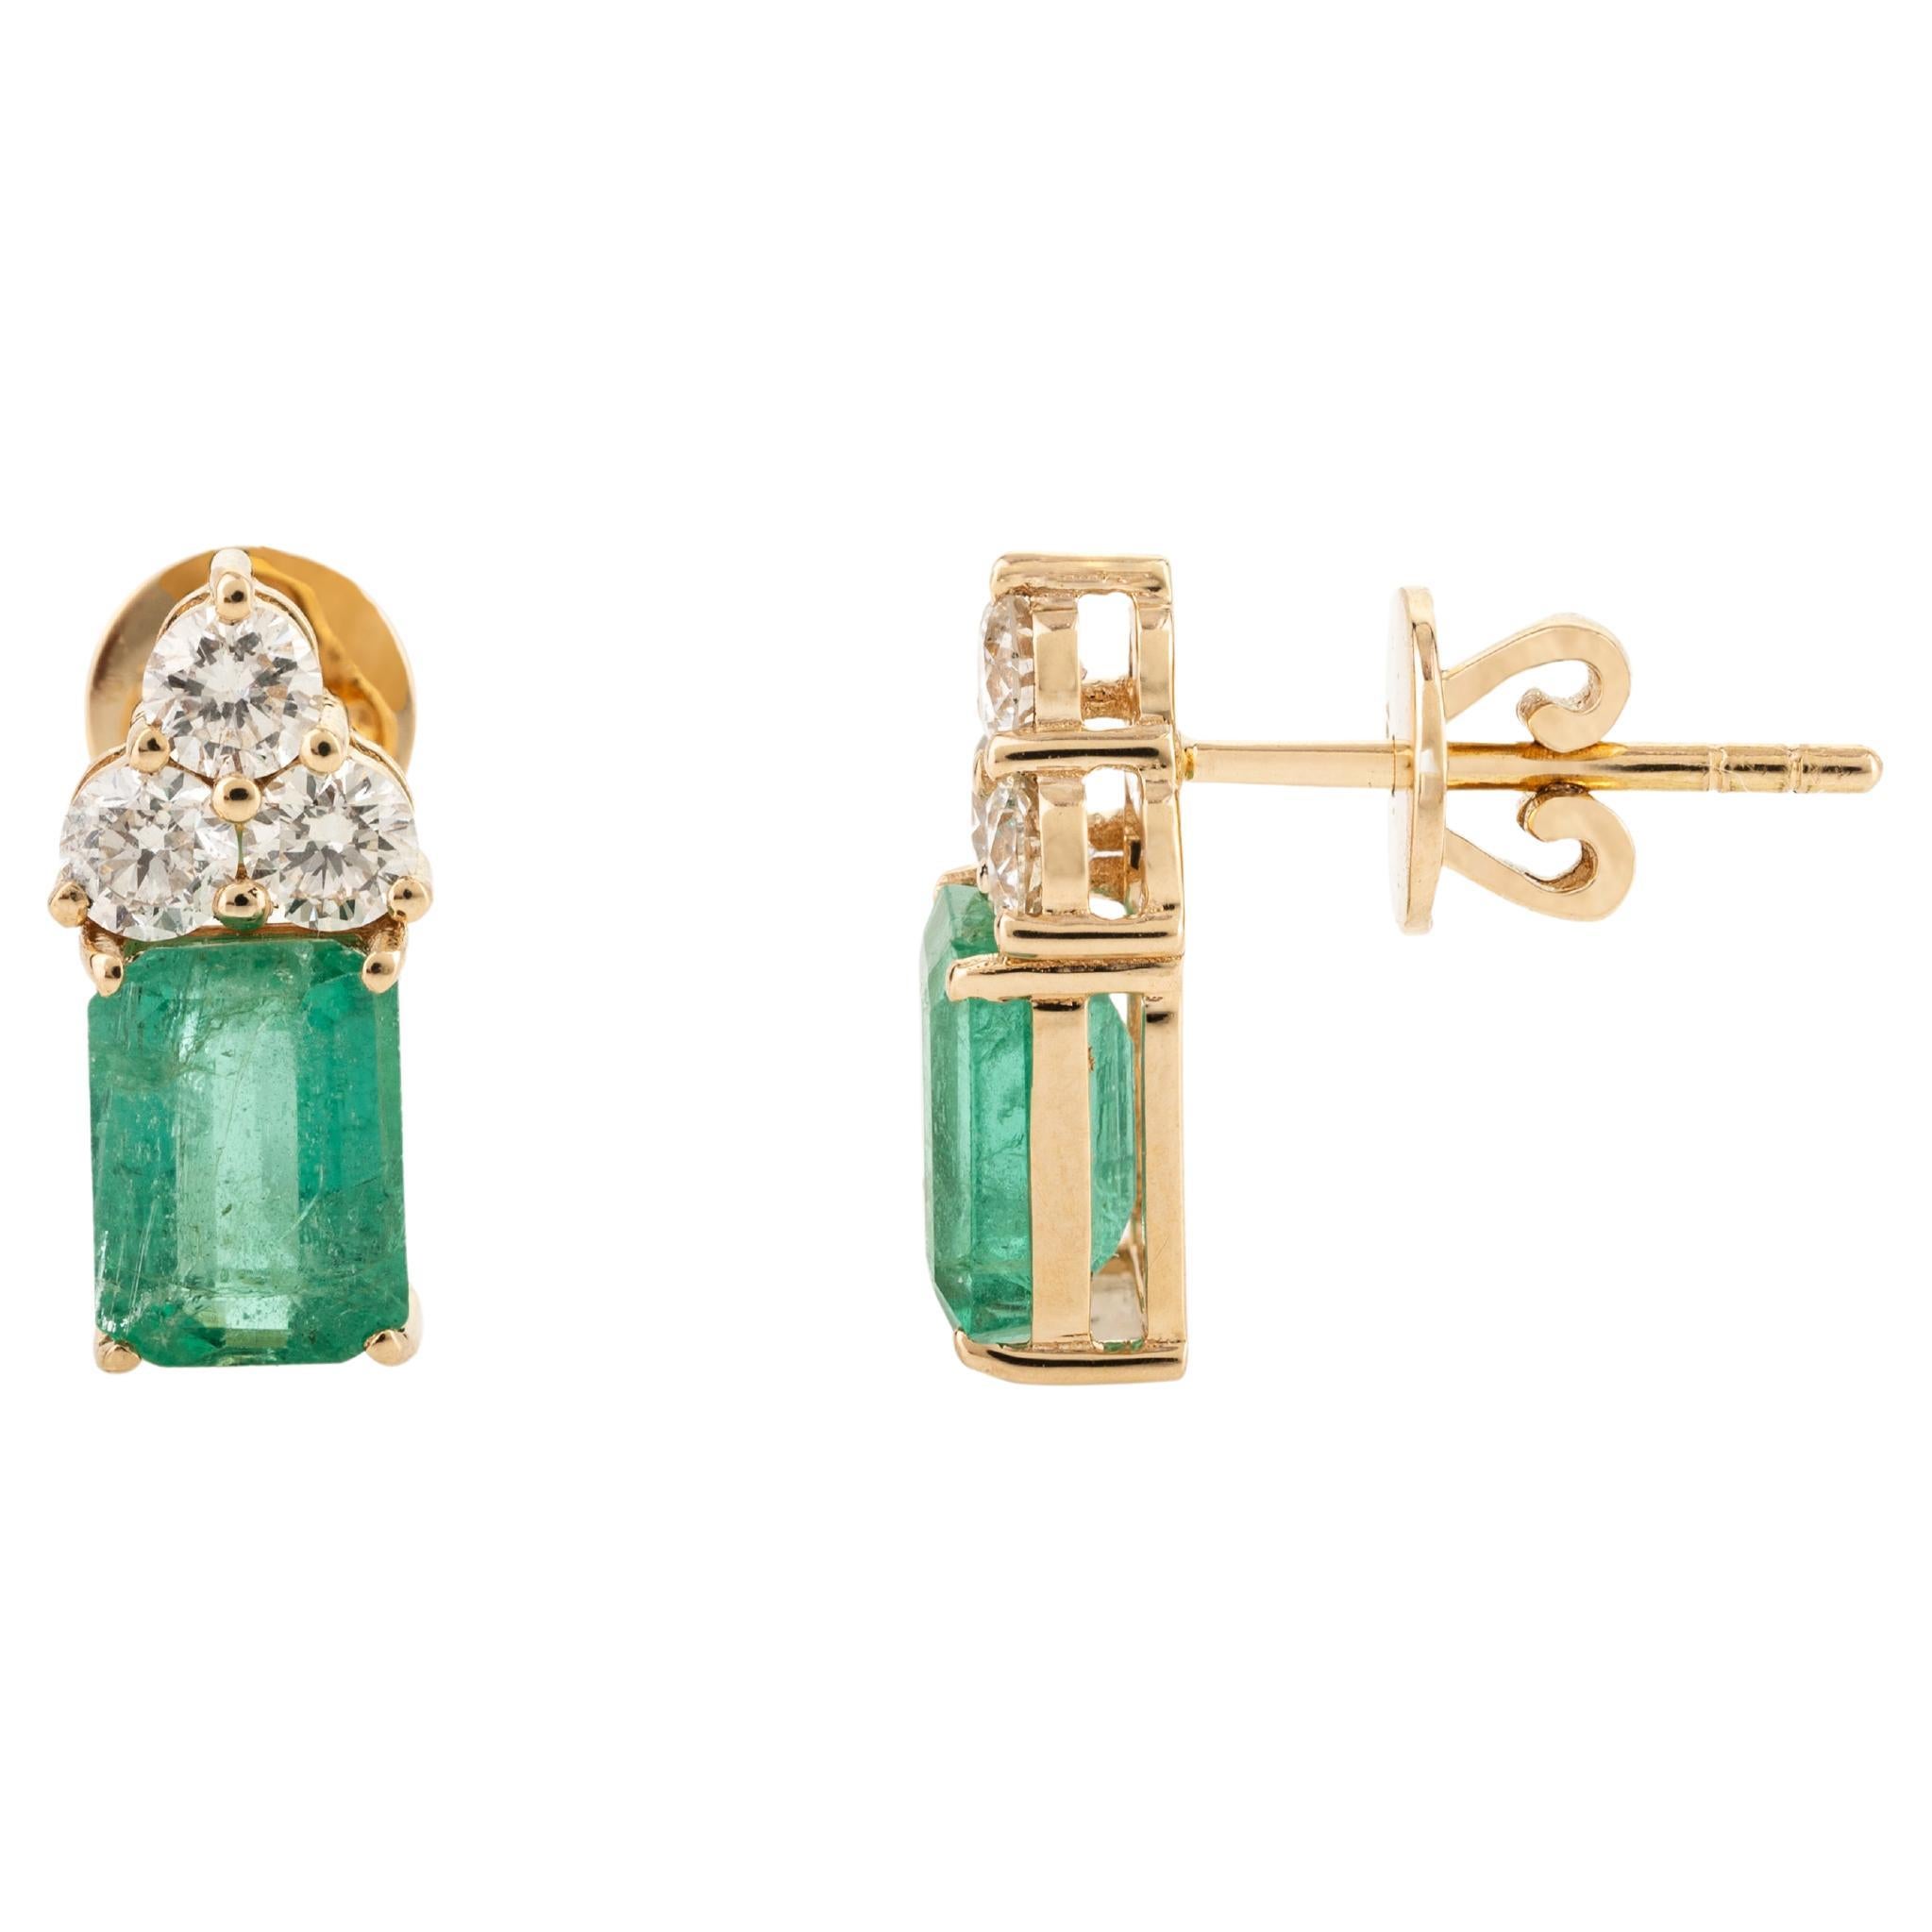 Stunning Diamond and emerald Stud Earrings in 18 Karat Yellow Gold for Her For Sale